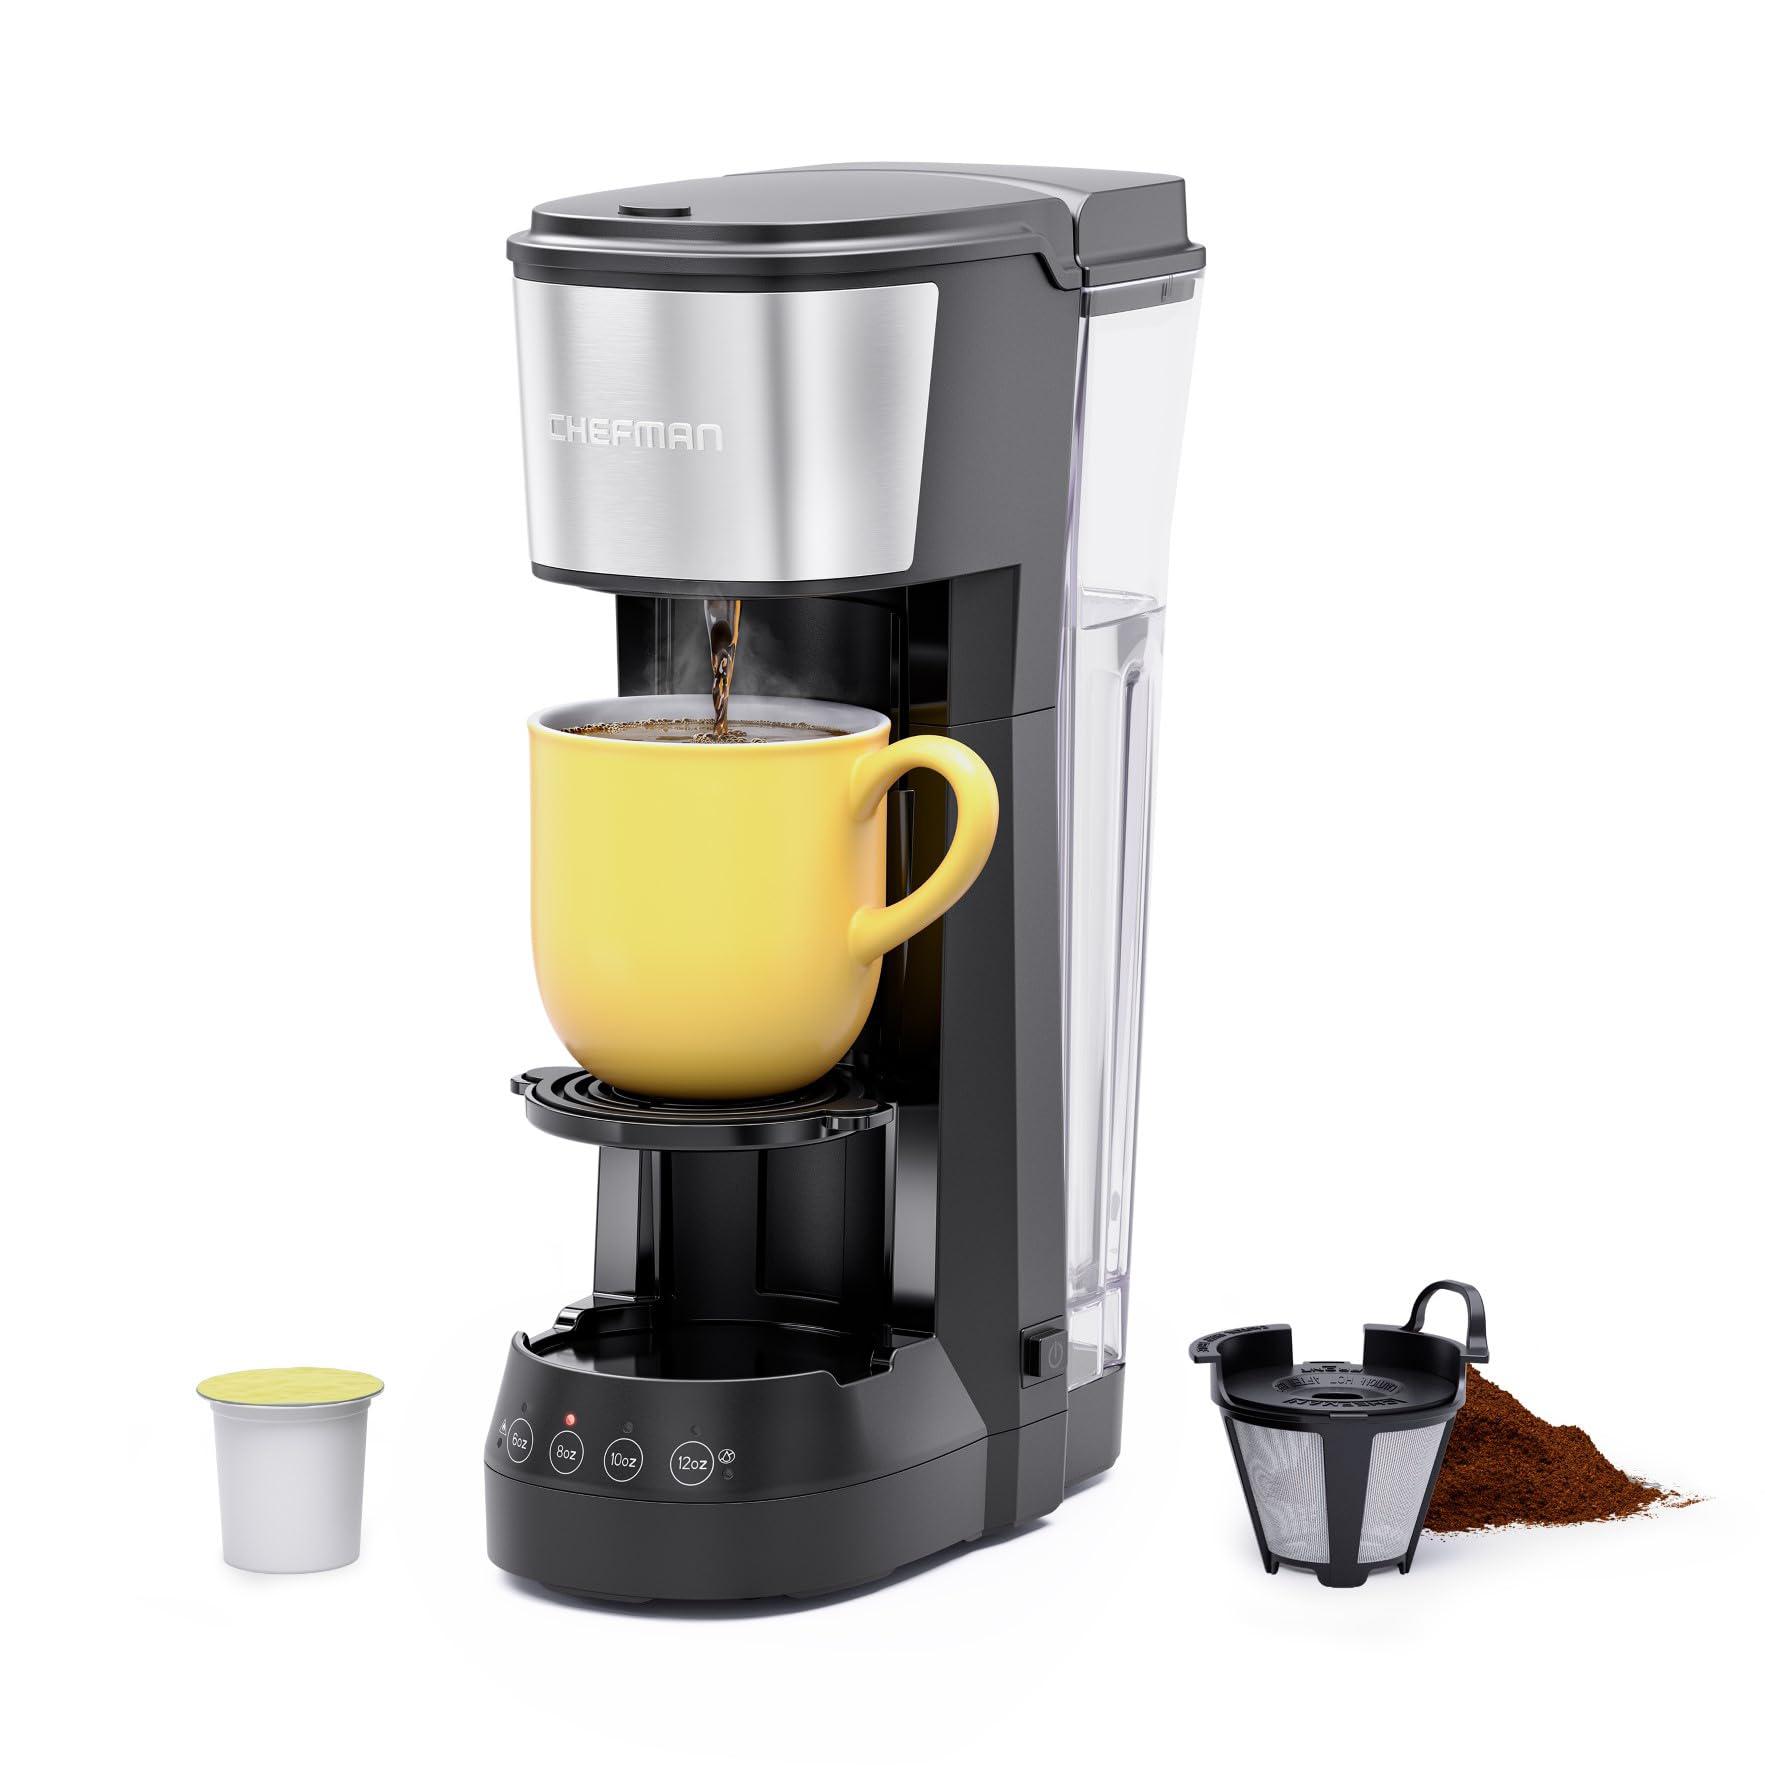 chefman single serve coffee maker, k cup coffee machine: compatible with k-cup pods and ground coffee, brew 6 to 12oz cup dri